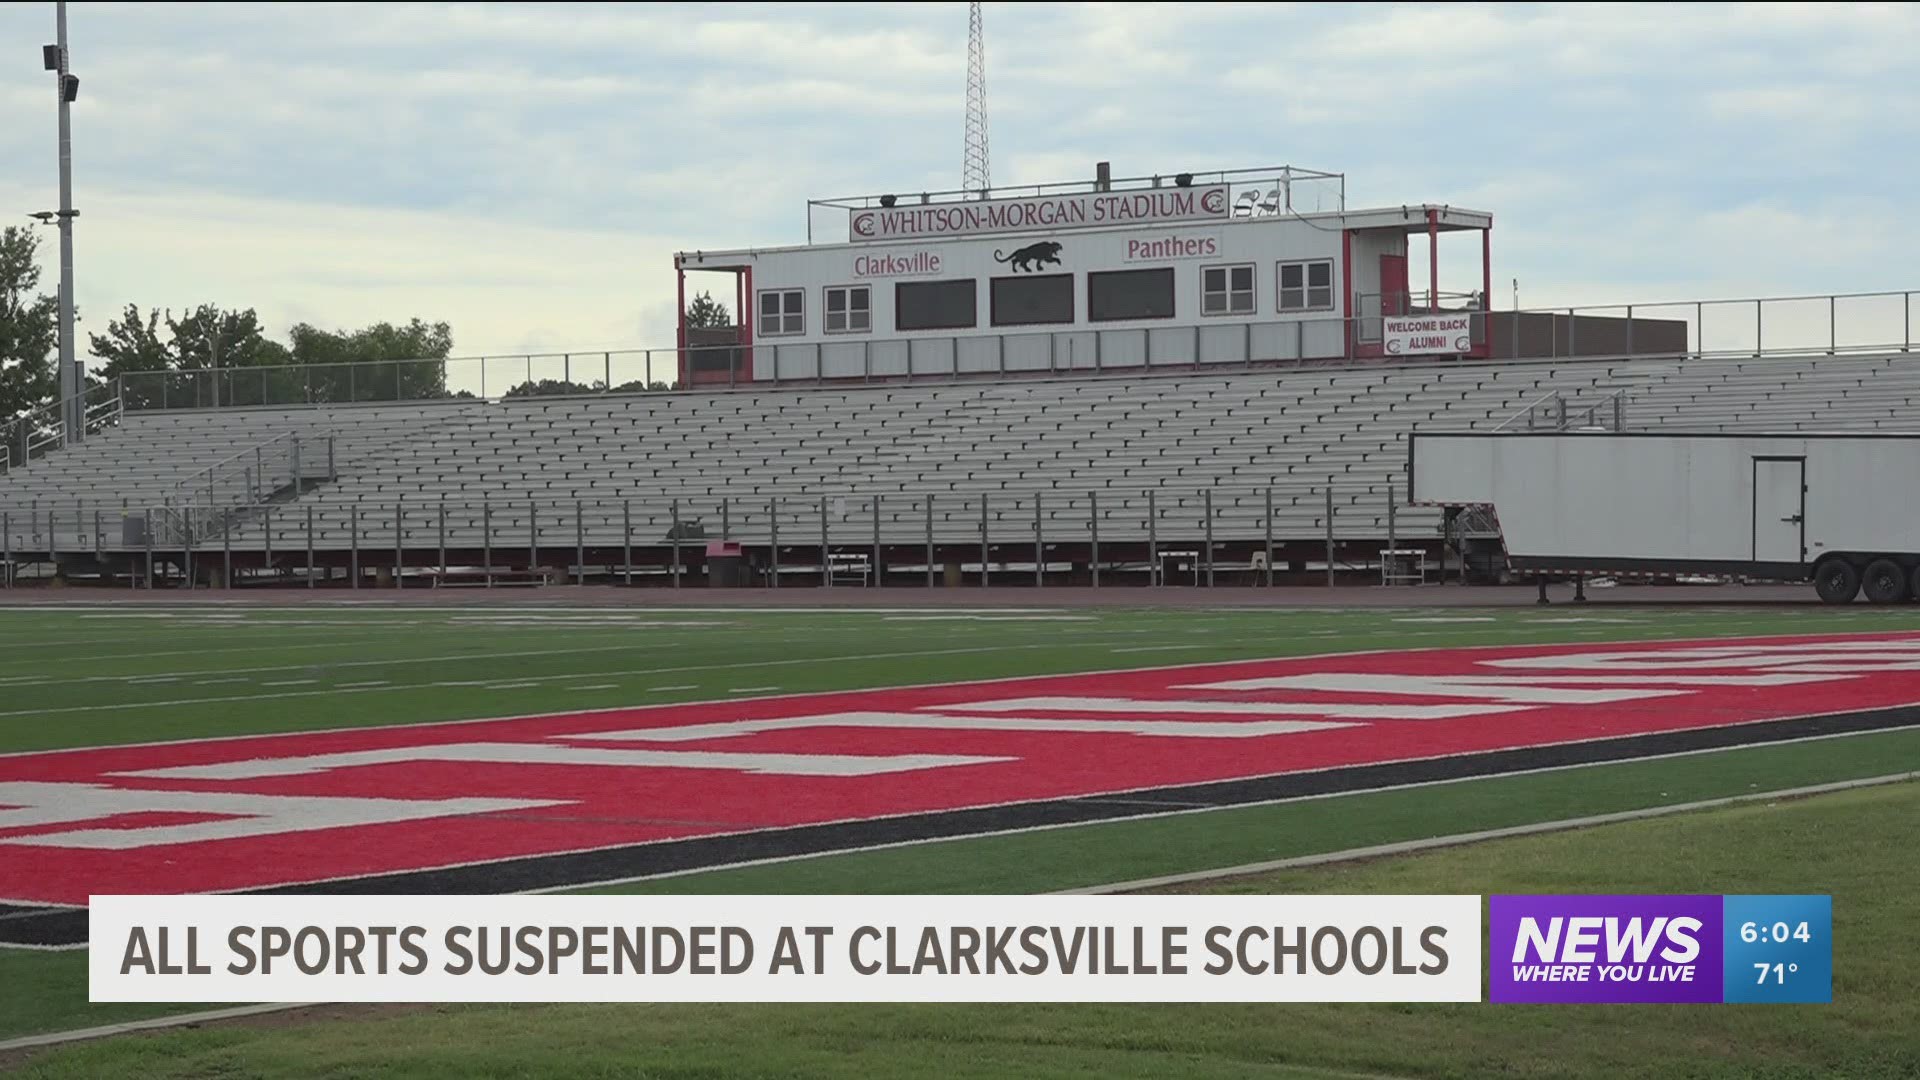 All sports suspended at Clarksville Schools after players test positive for COVID-19